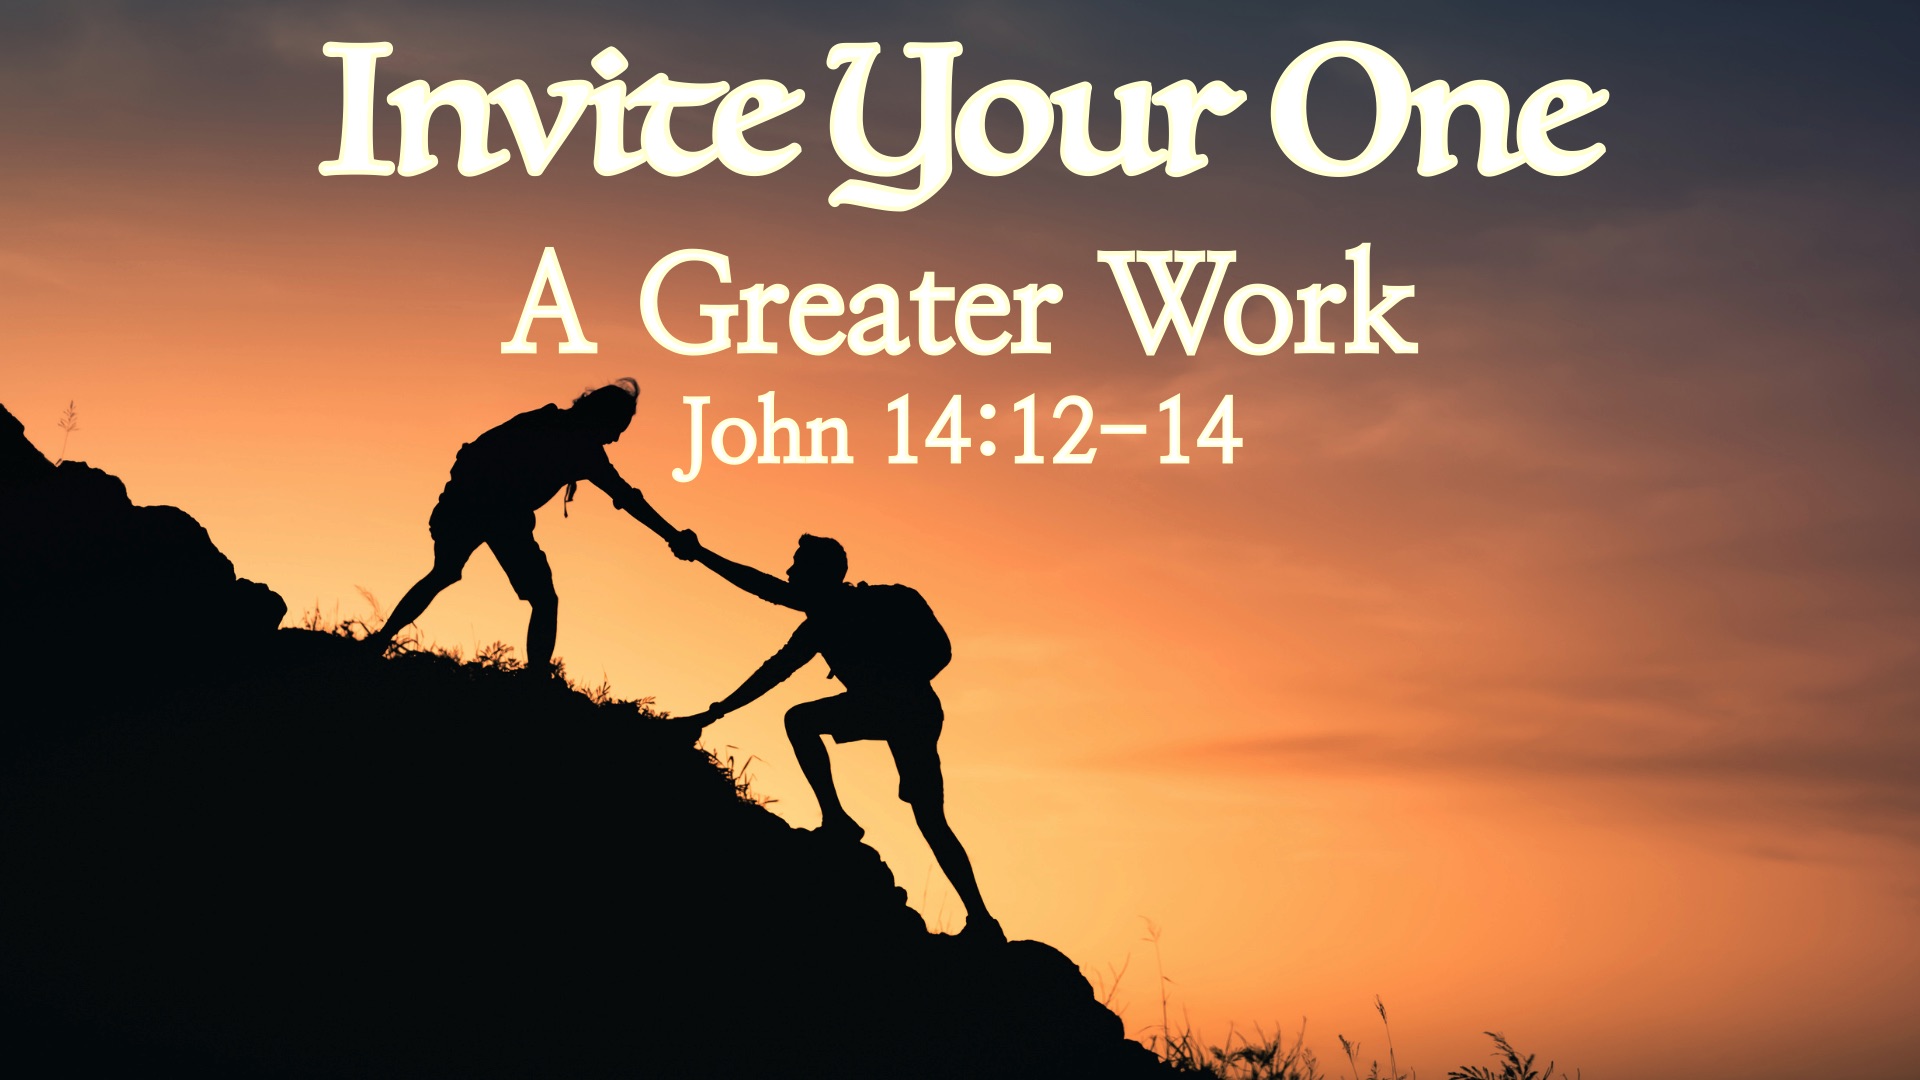 “Invite Your One: A Greater Work”